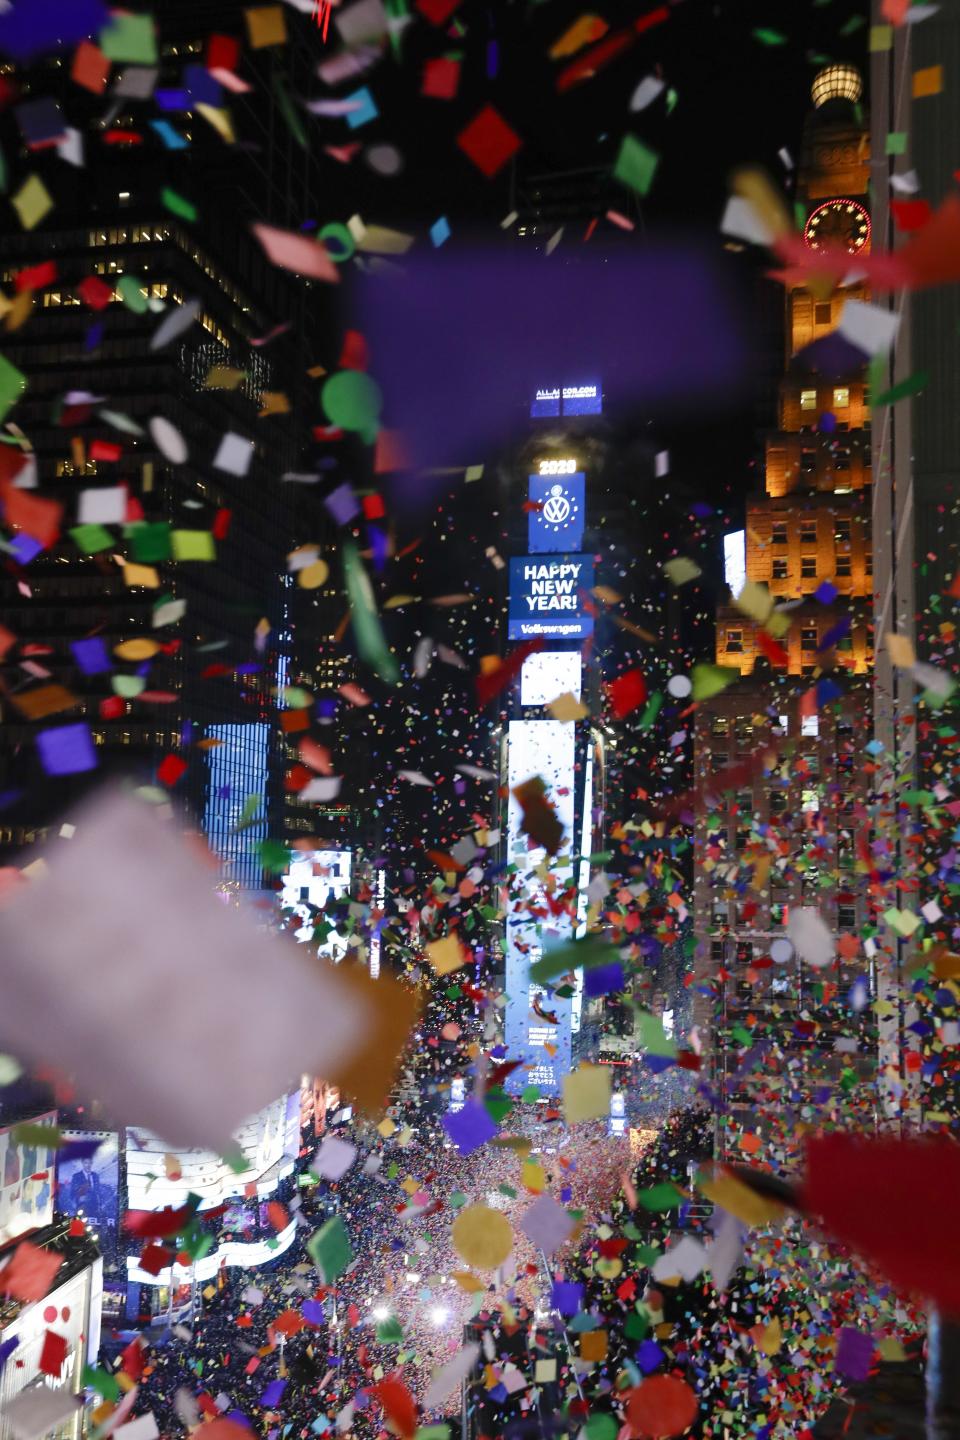 Confetti drops over the crowd as the clock strikes midnight during the New Year's celebration as seen from the New York Marriott Marquis in New York's Times Square, late Tuesday, Dec. 31, 2019. (AP Photo/Frank Franklin II)